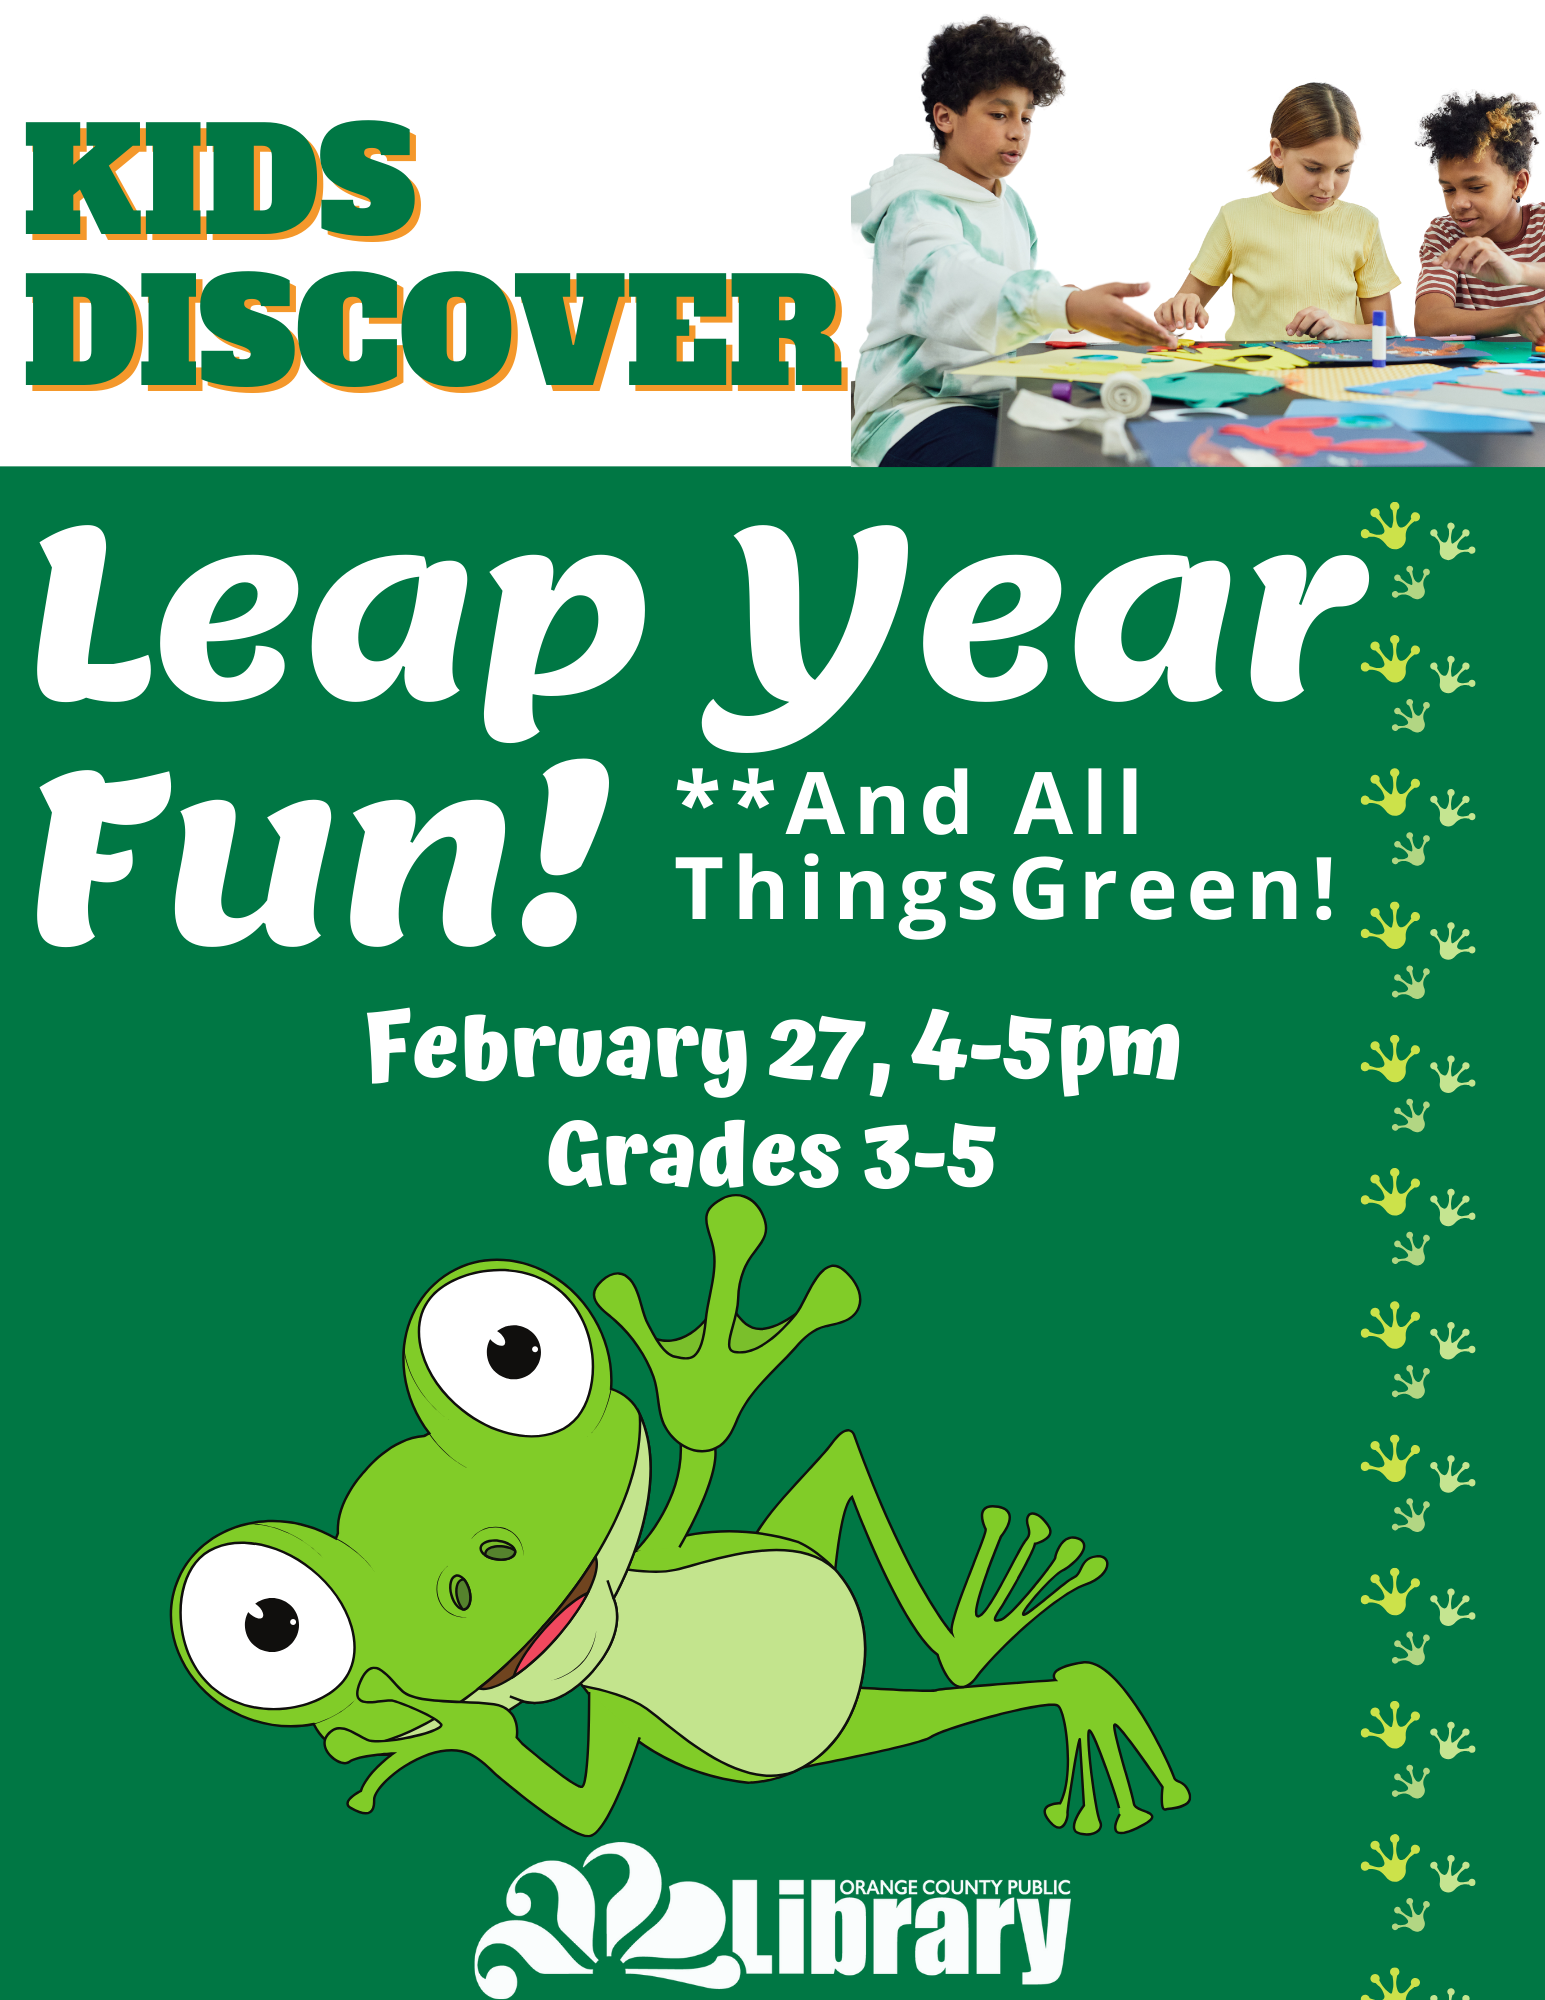 Leap year fun! Cartoon frog on a green background.